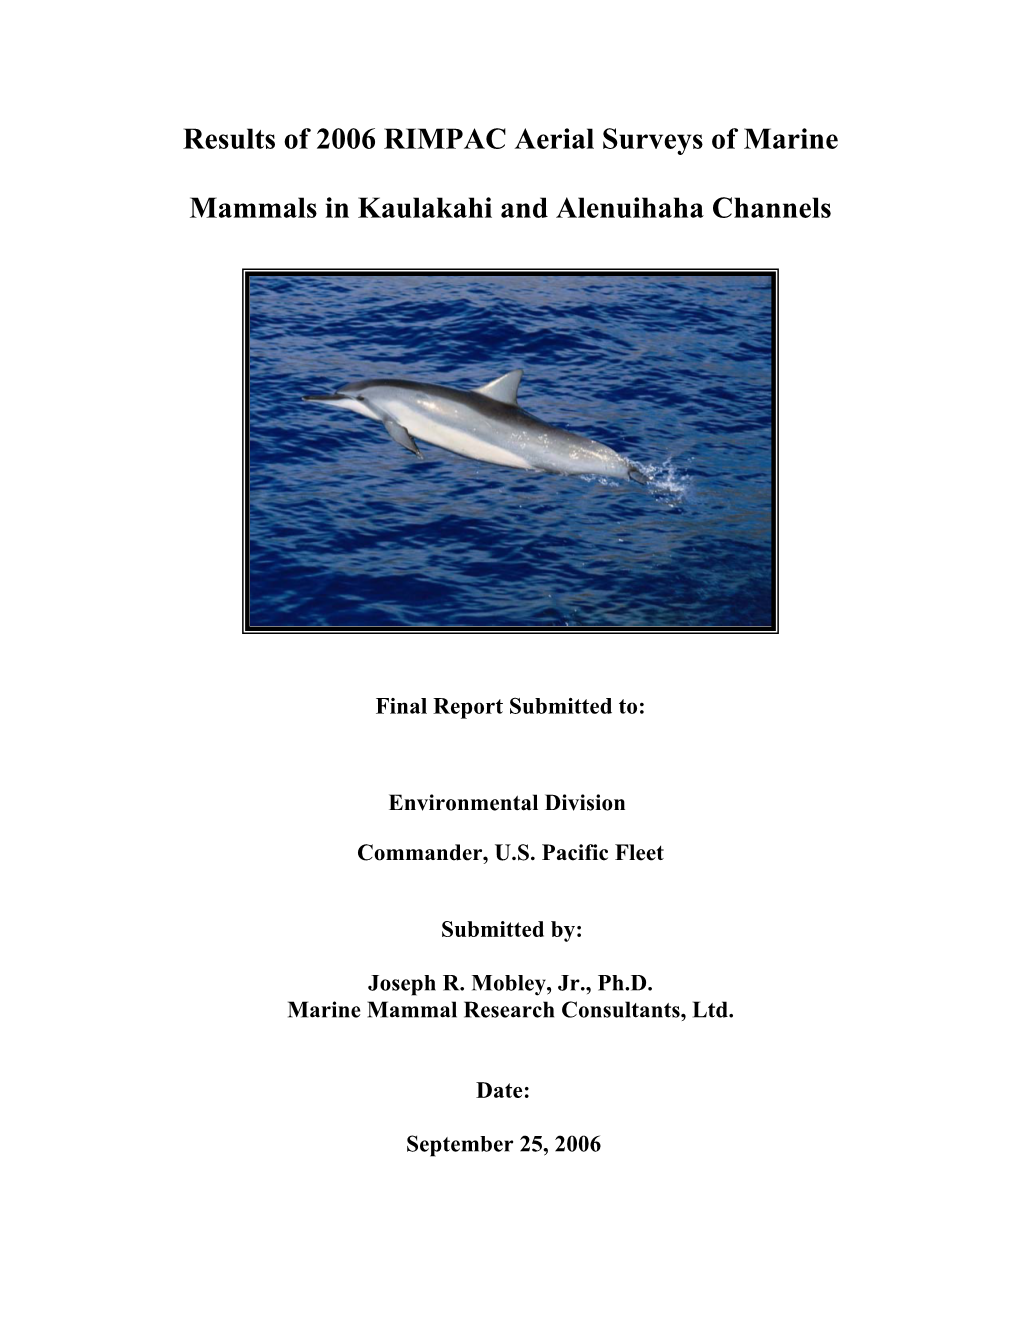 Results of 2002 Aerial Surveys of Humpback Whales